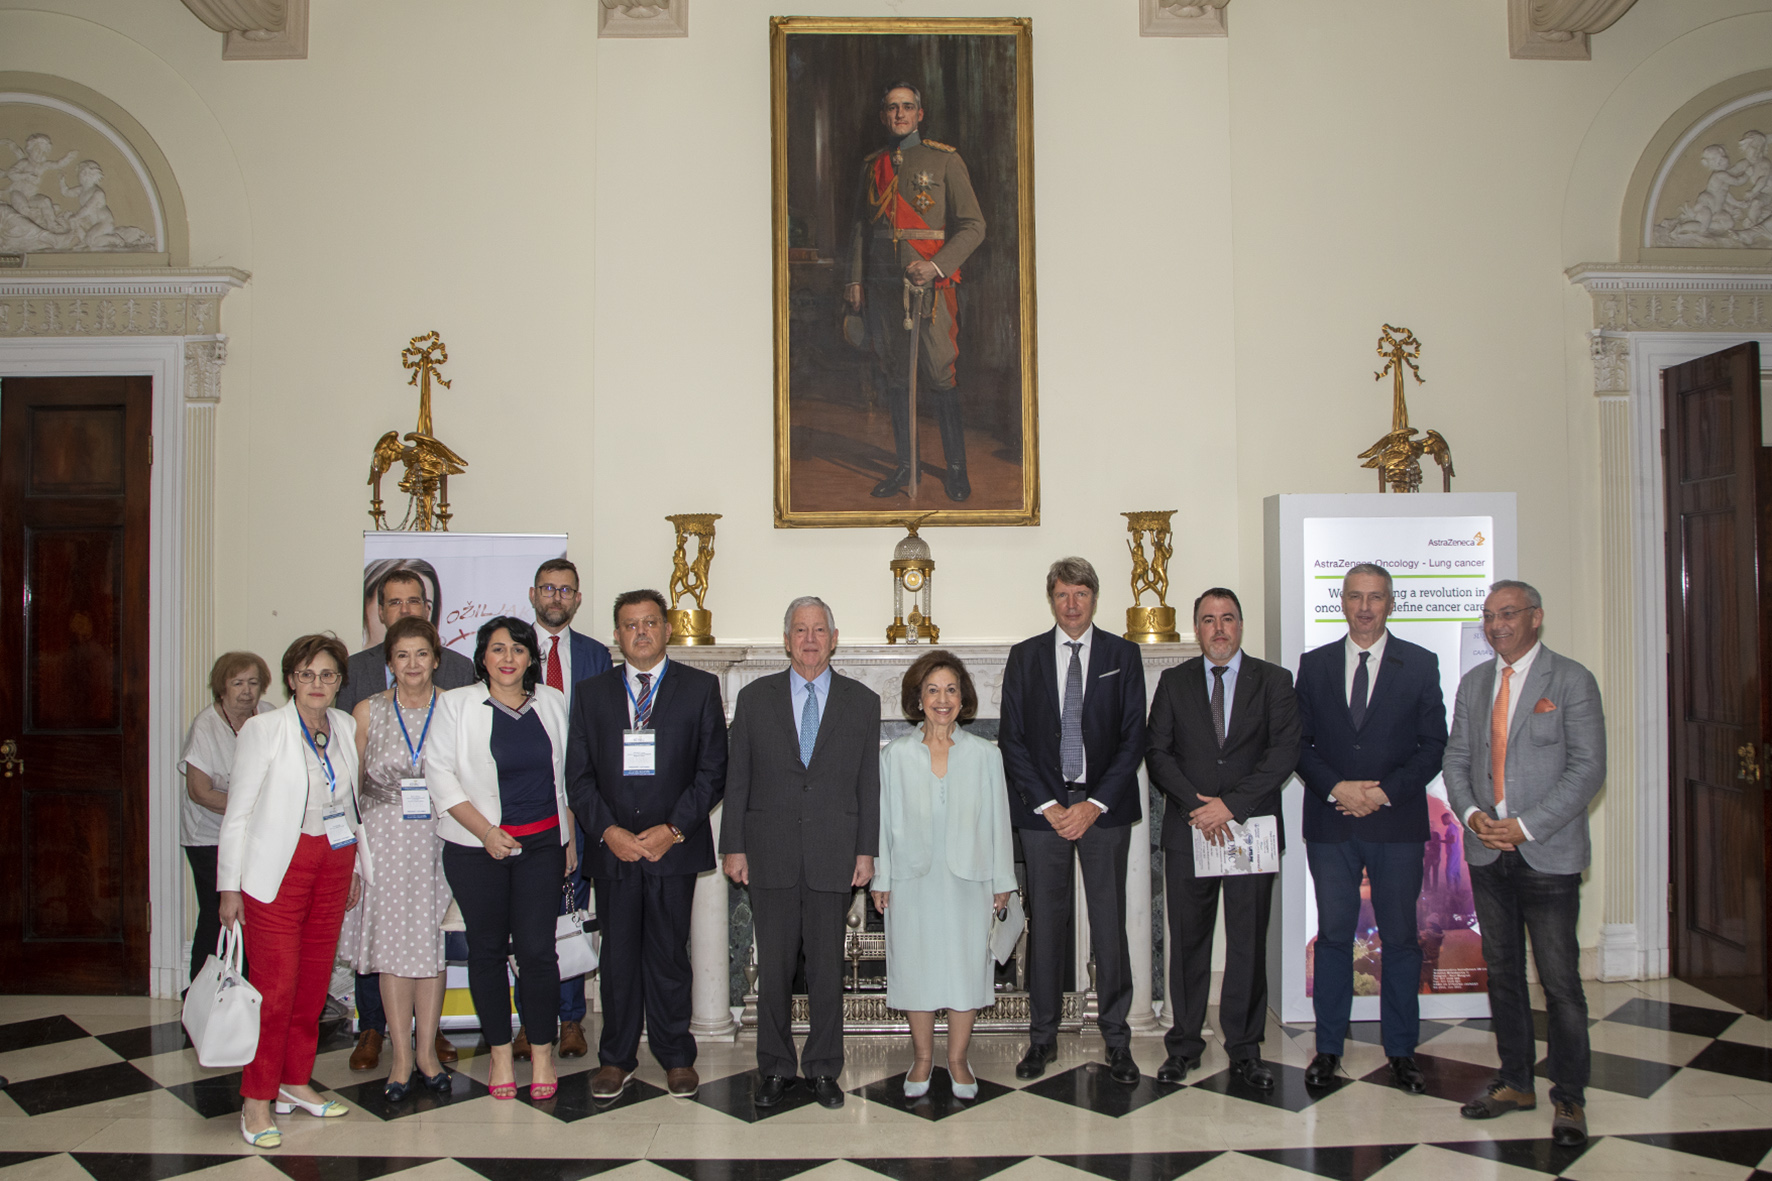 TRH Crown Prince Alexander and Crown Princess Katherine with Prof dr Predrag Sazdanovic, State Secretary in the Ministry of Health, Prof. Dr. Lazar Davidovic, Dean of the Medical Faculty of the University of Belgrade, Dr. Milan Dinic, representative of the Serbian Medical Chamber and members of the Royal Medical Board